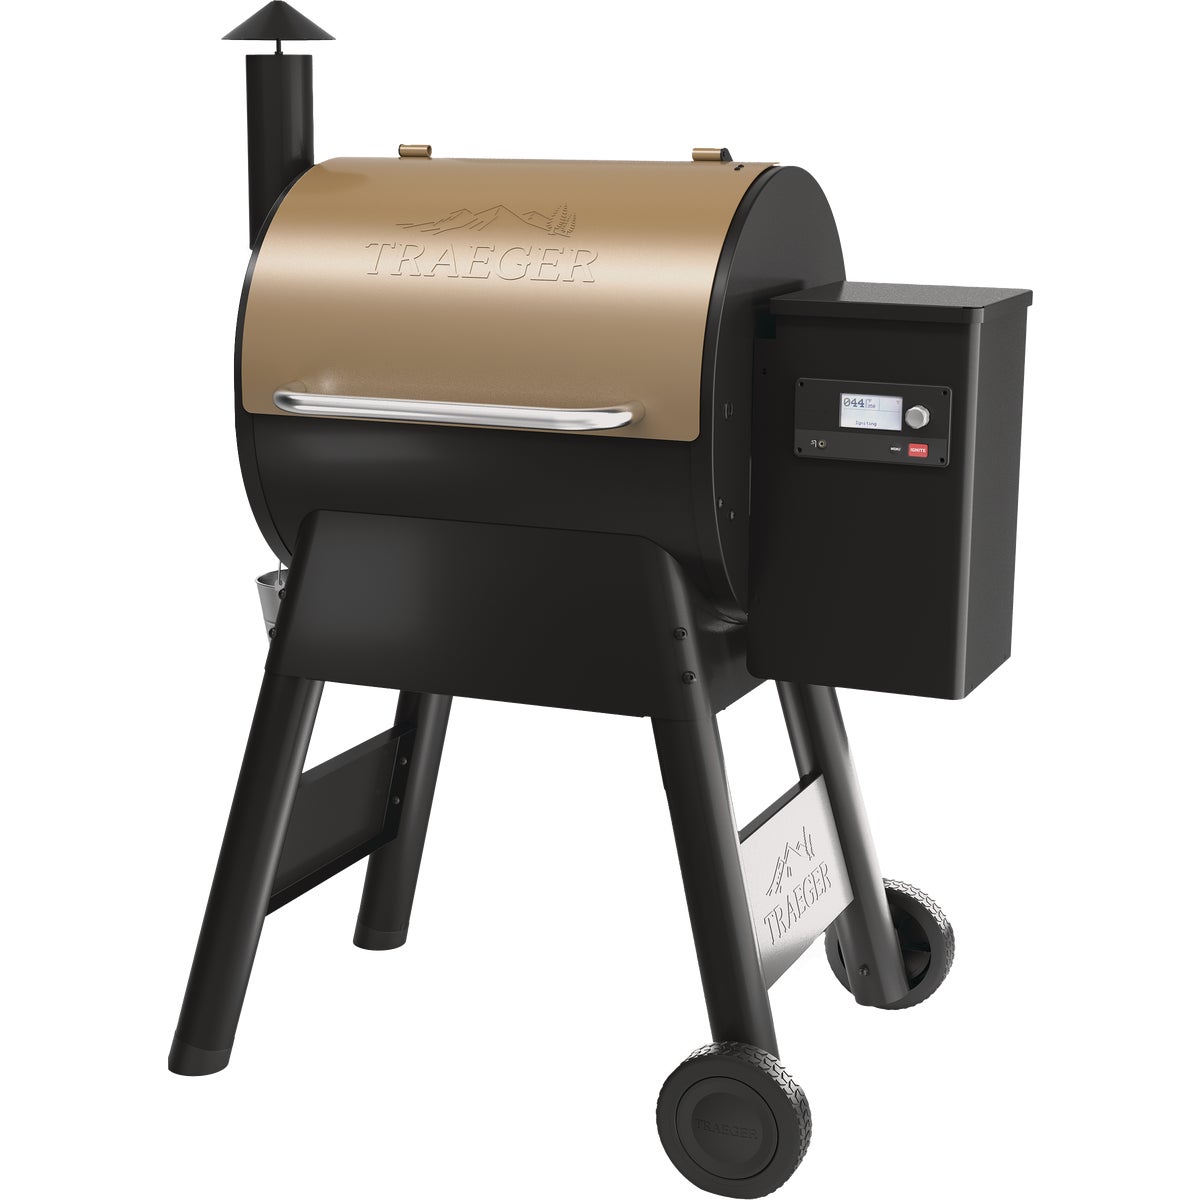 Item 816859, Wood pellet grill featuring WiFIRE technology and a Pro D2 controller.